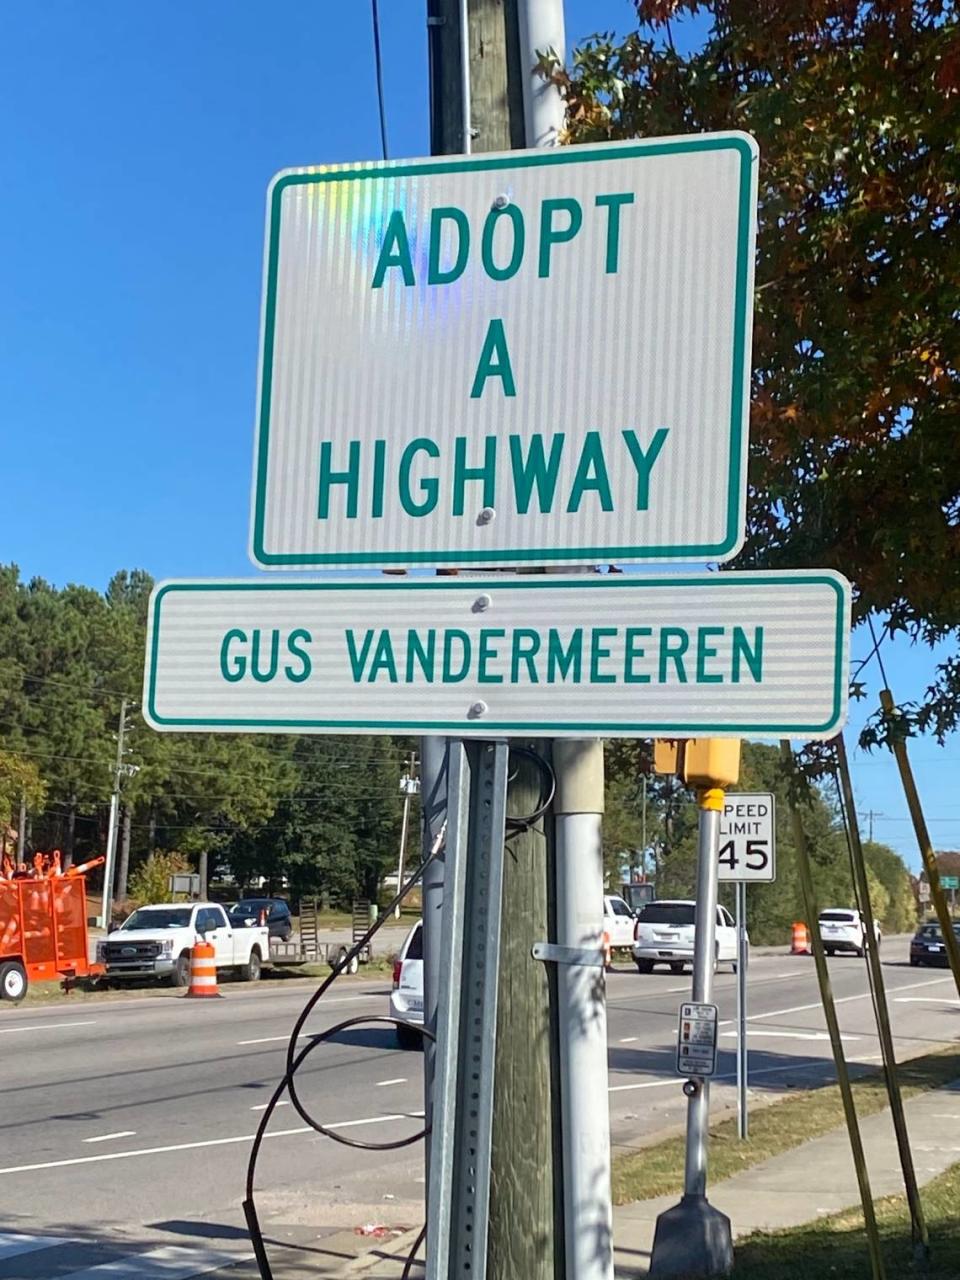 Gus Vandermeeren has his own adopt-a-highway sign on New Bern Avenue, and he collects so much garbage the state Department of Transportation gave him his own dumping spot.